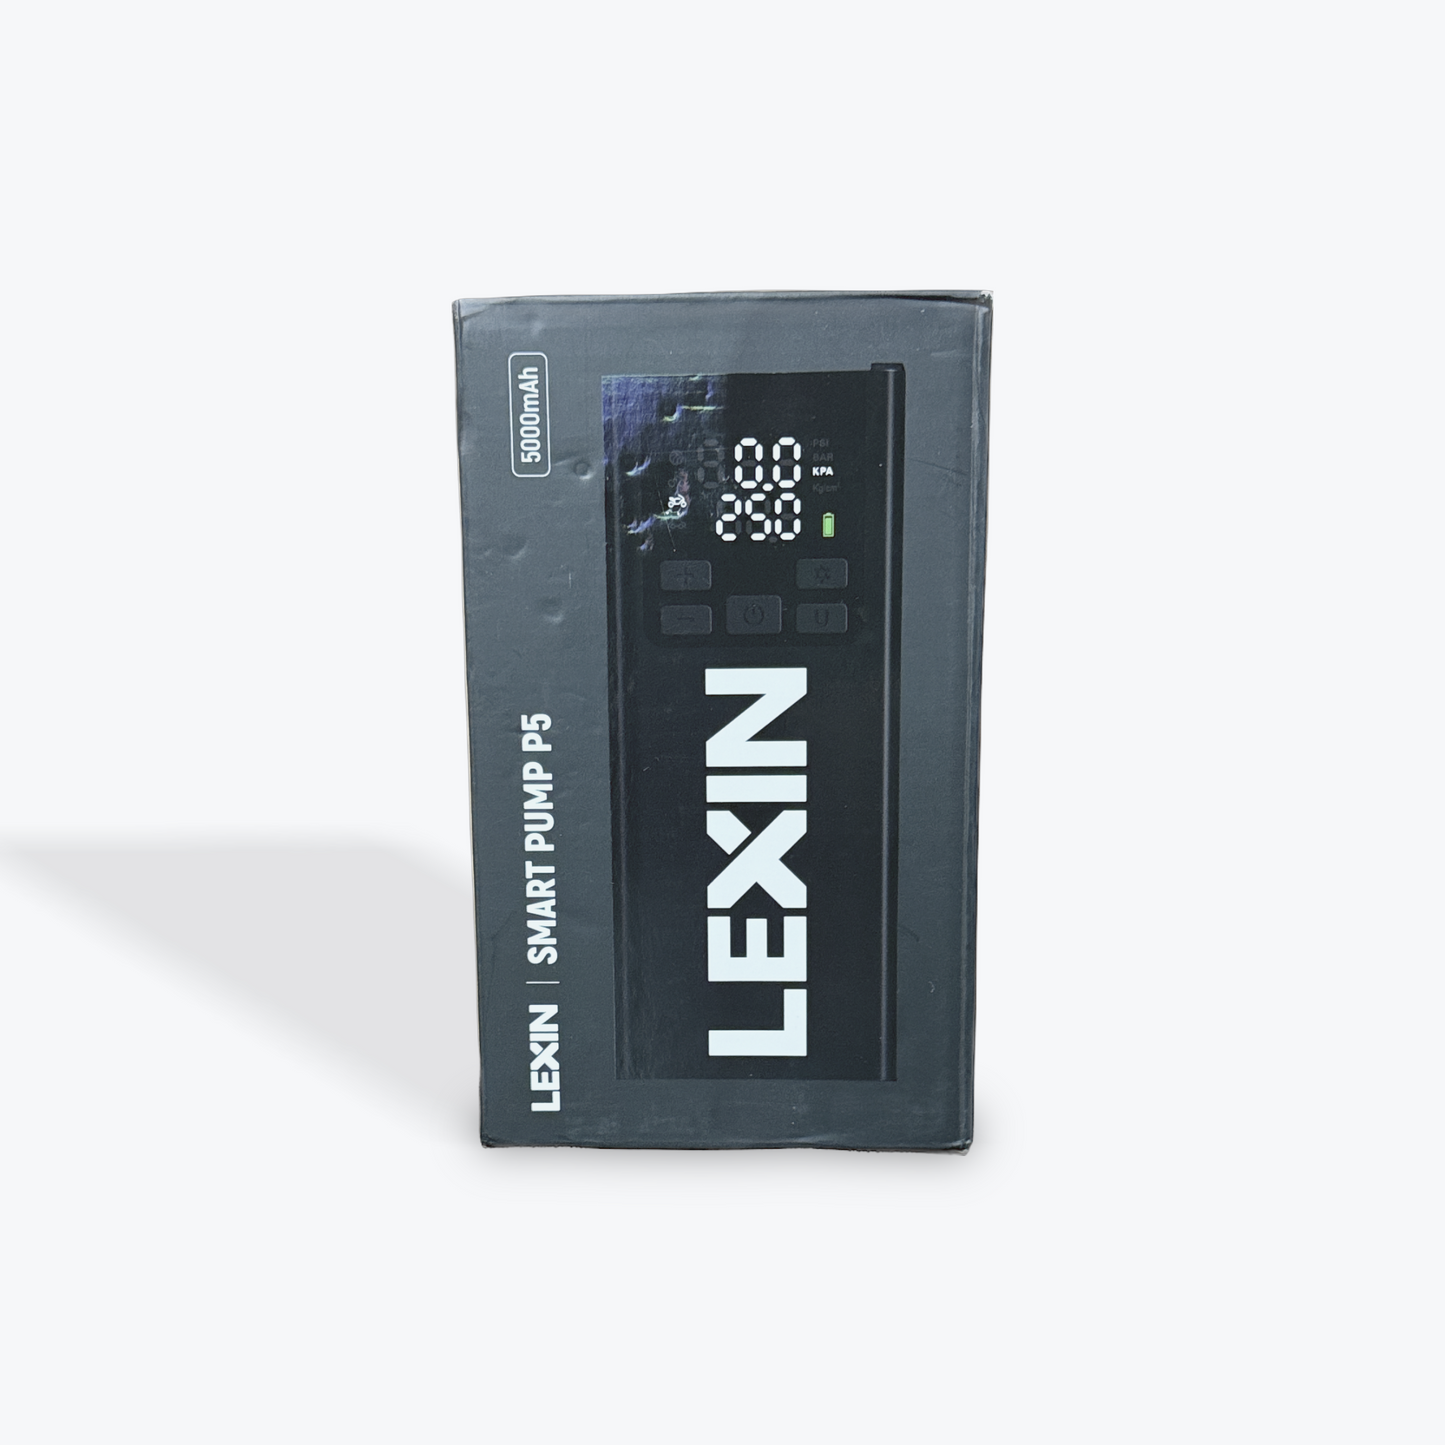 LEXIN P5 Advanced Smart Pump With Integrated battery pack